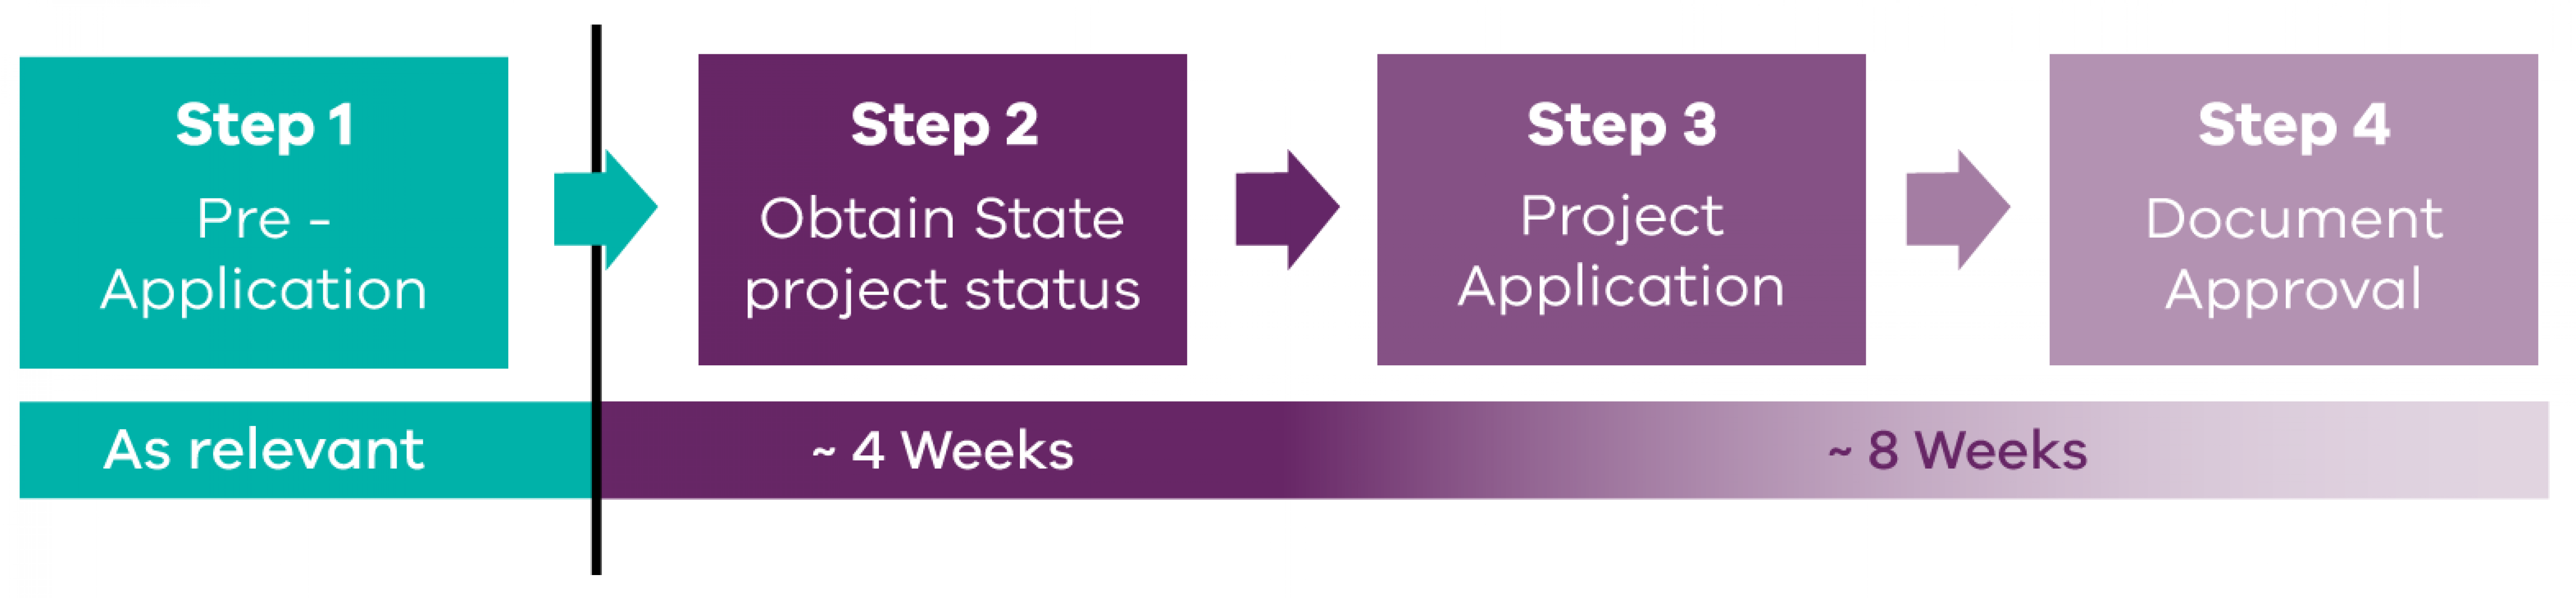 Steps in the assessment process and timeframes - Pre-application; Decision on State Project status 1-2 weeks; Conclusion with decision up to 8 weeks